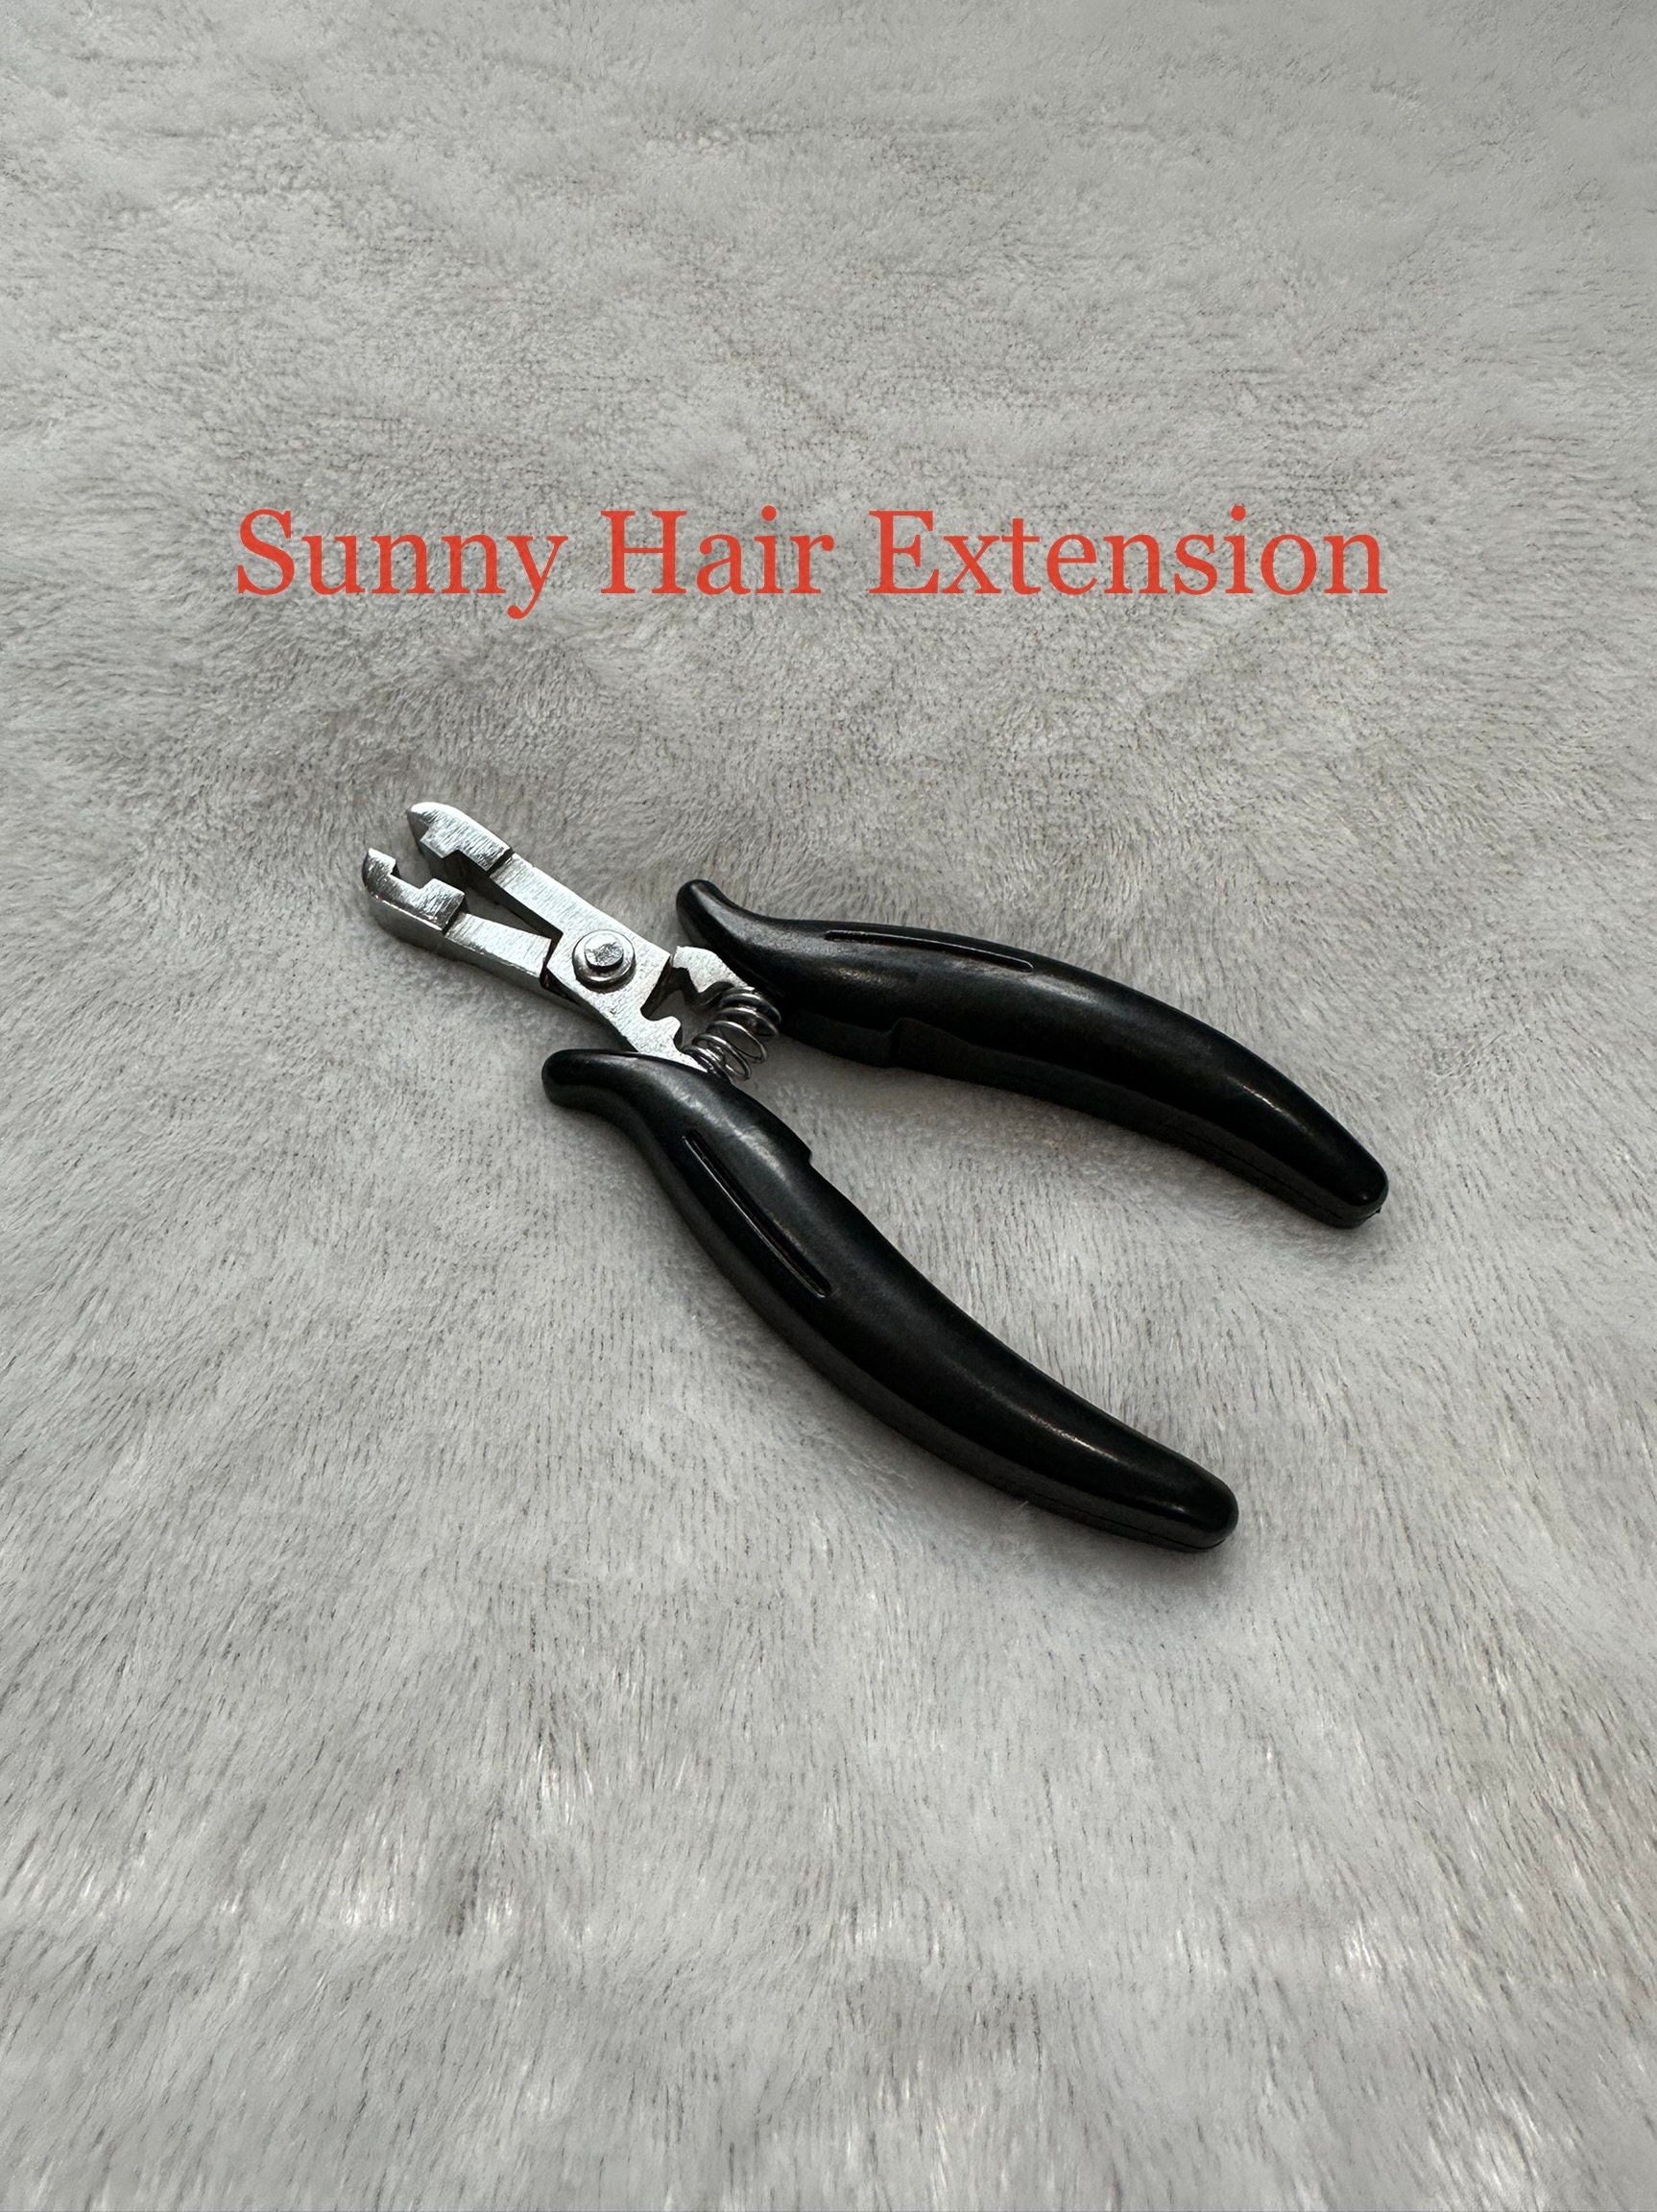 Hair Extensions Tools Kit for Hair Extensions: Pliers, Micro Pulling  Needle, 100pcs Brown Micro Link Rings Beads & 5pcs Silver Metal Alligator  Hair